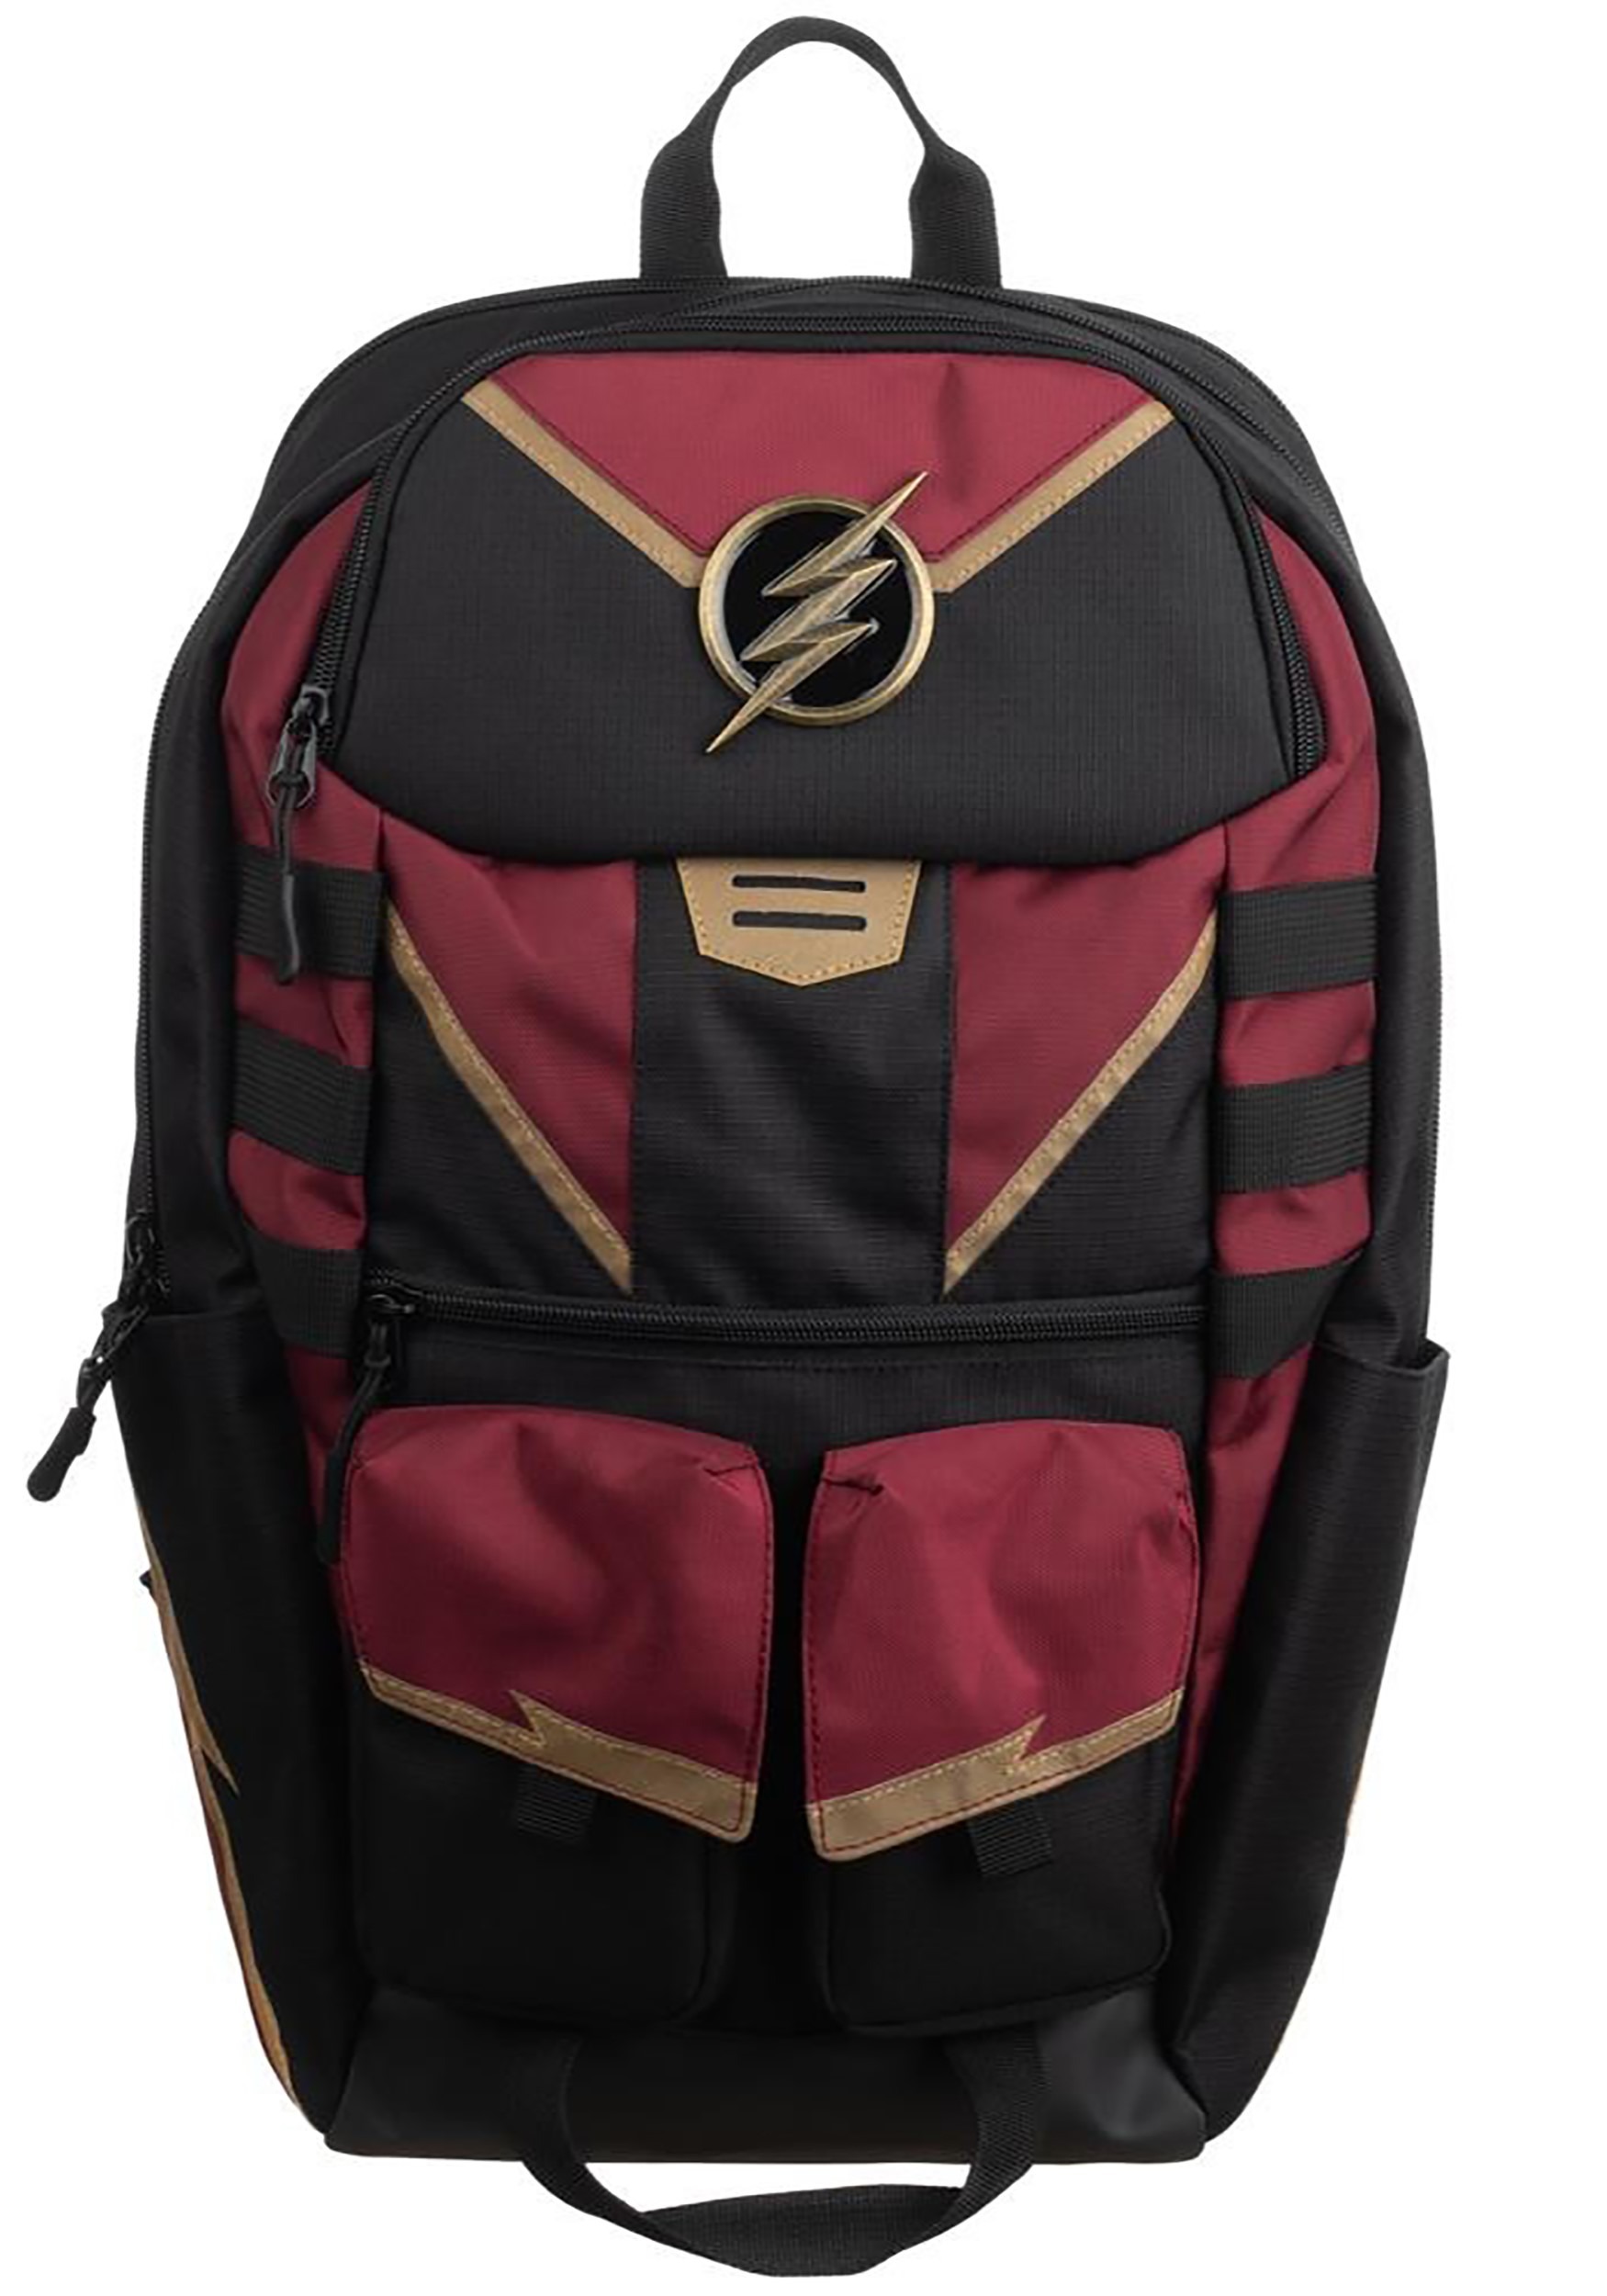 Black and Maroon The Flash Backpack